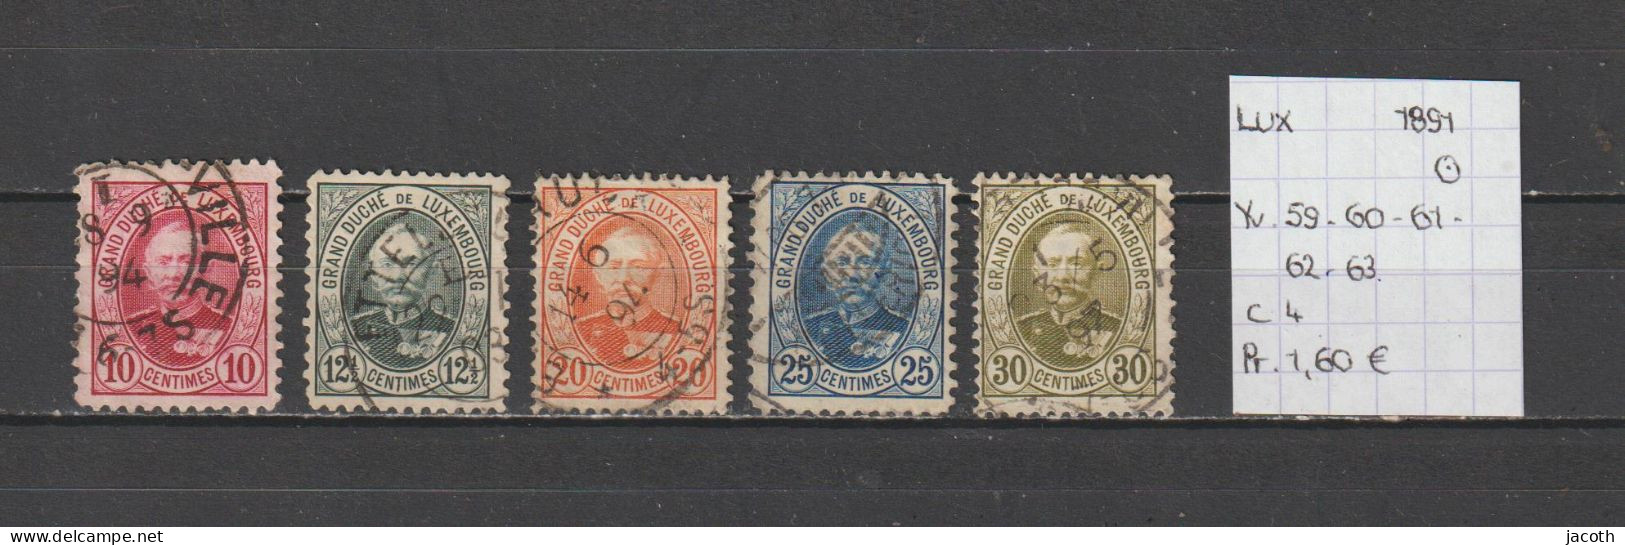 (TJ) Luxembourg 1891 - YT 59 + 60 + 61 + 62 + 63 (gest./obl./used) - 1891 Adolphe De Face